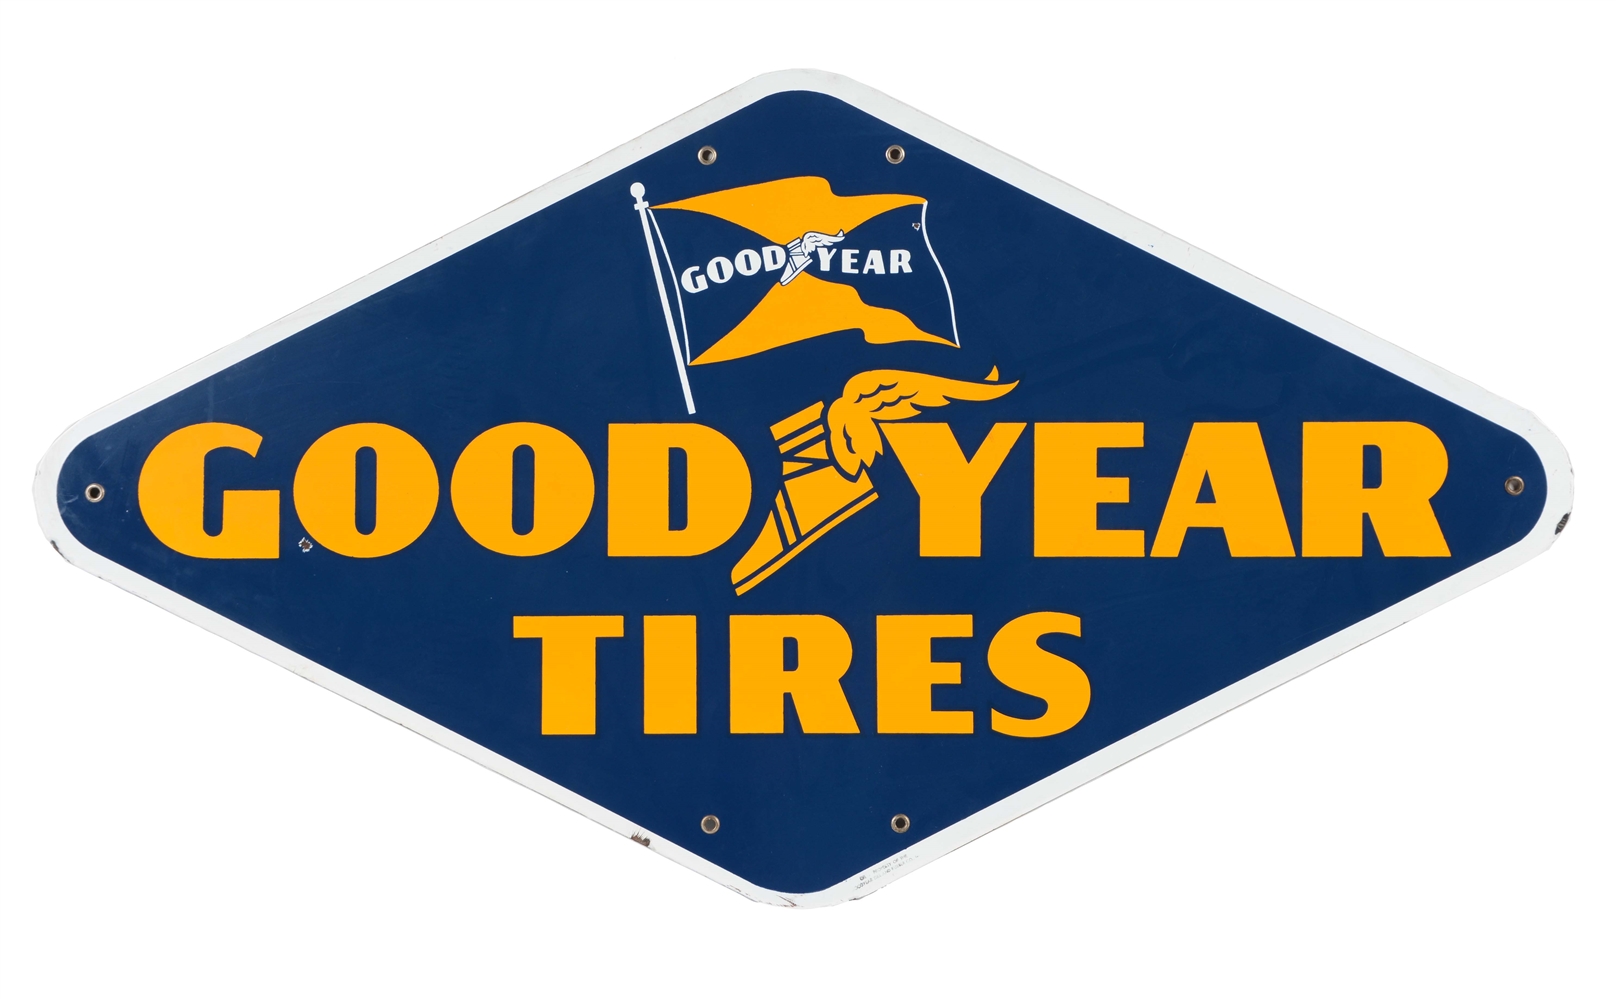 GOODYEAR TIRES DIAMOND SHAPED PORCELAIN SIGN. 